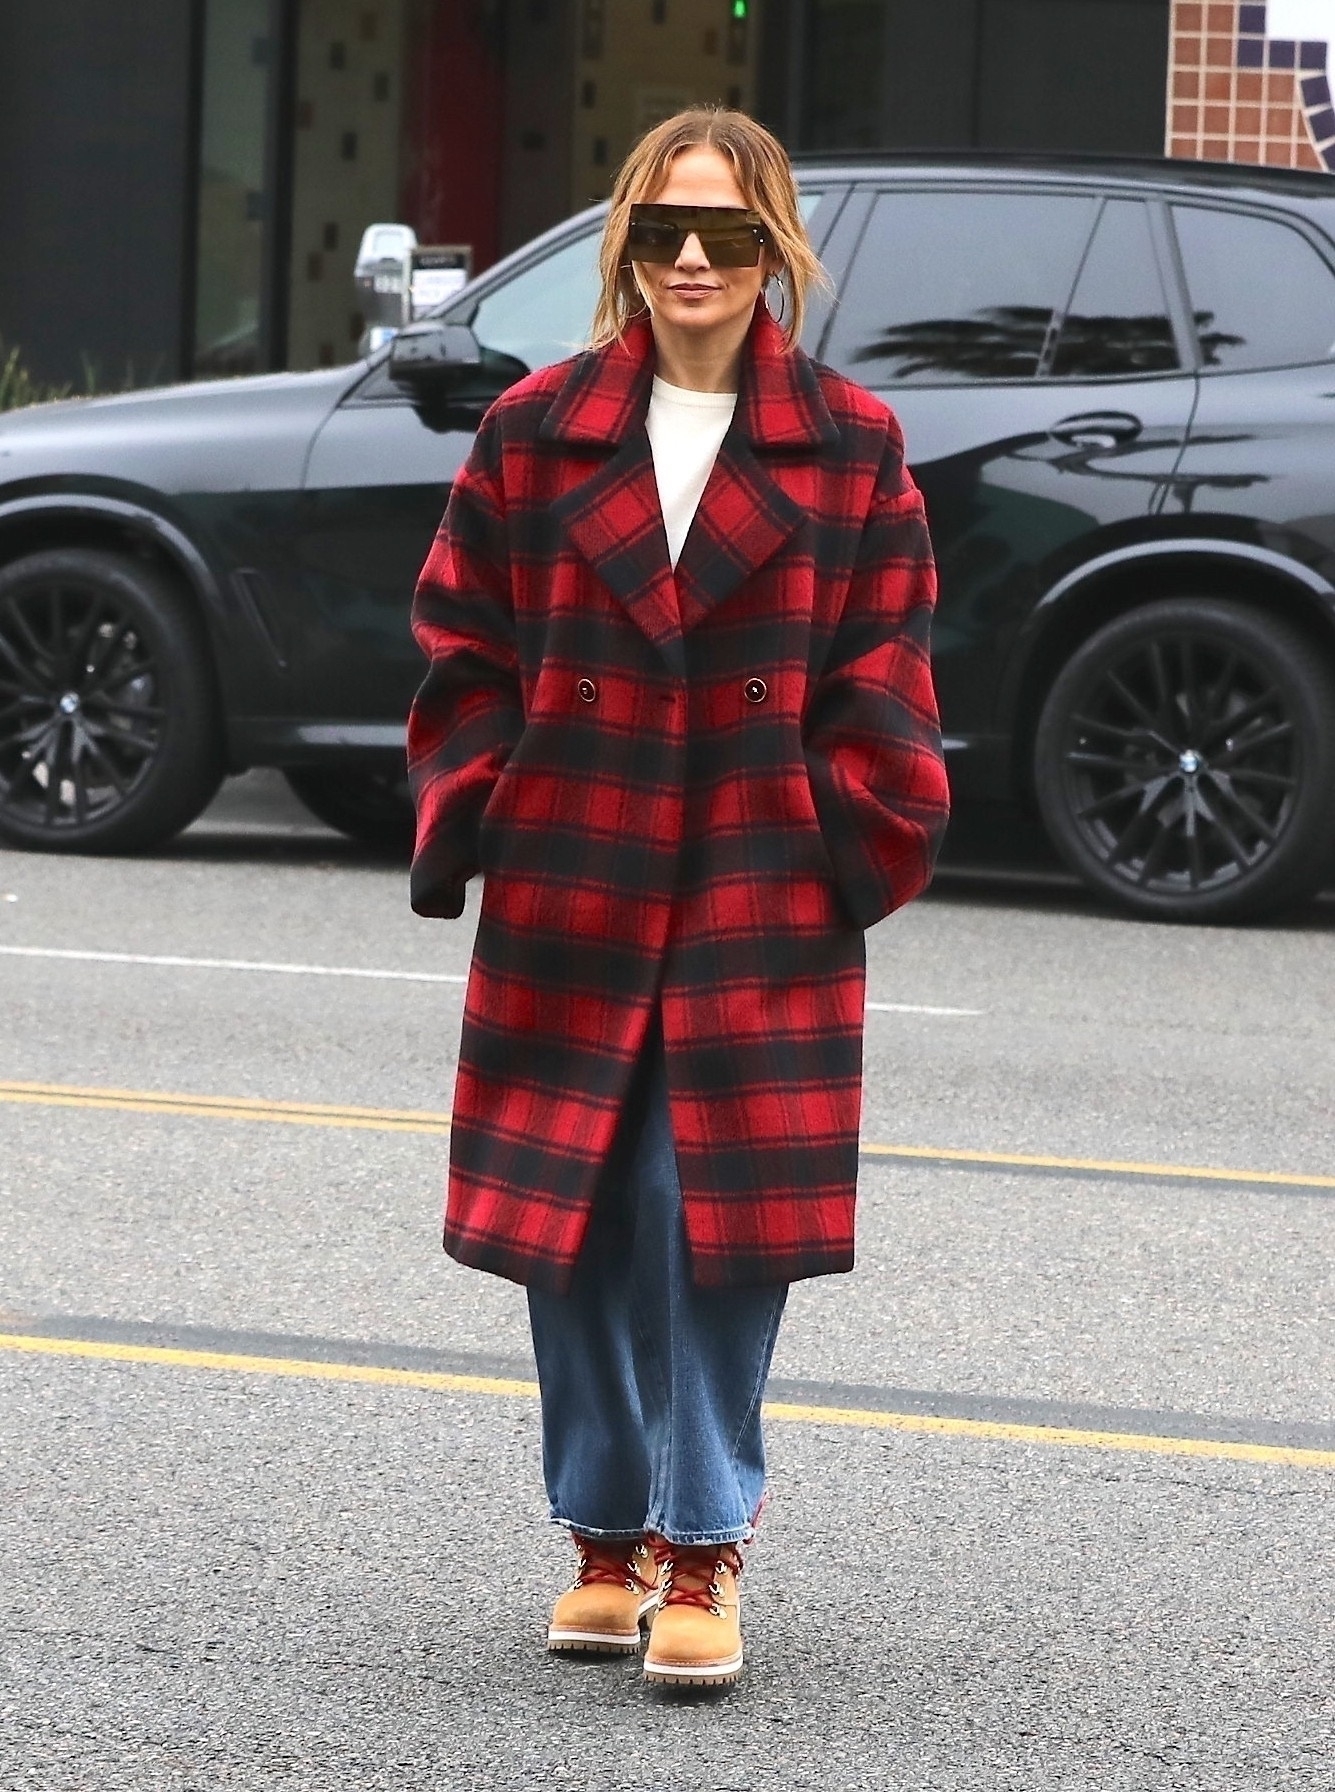 Gigi Hadid Wears a Plaid Coat, Fuzzy Hat for a Walk with Her Baby